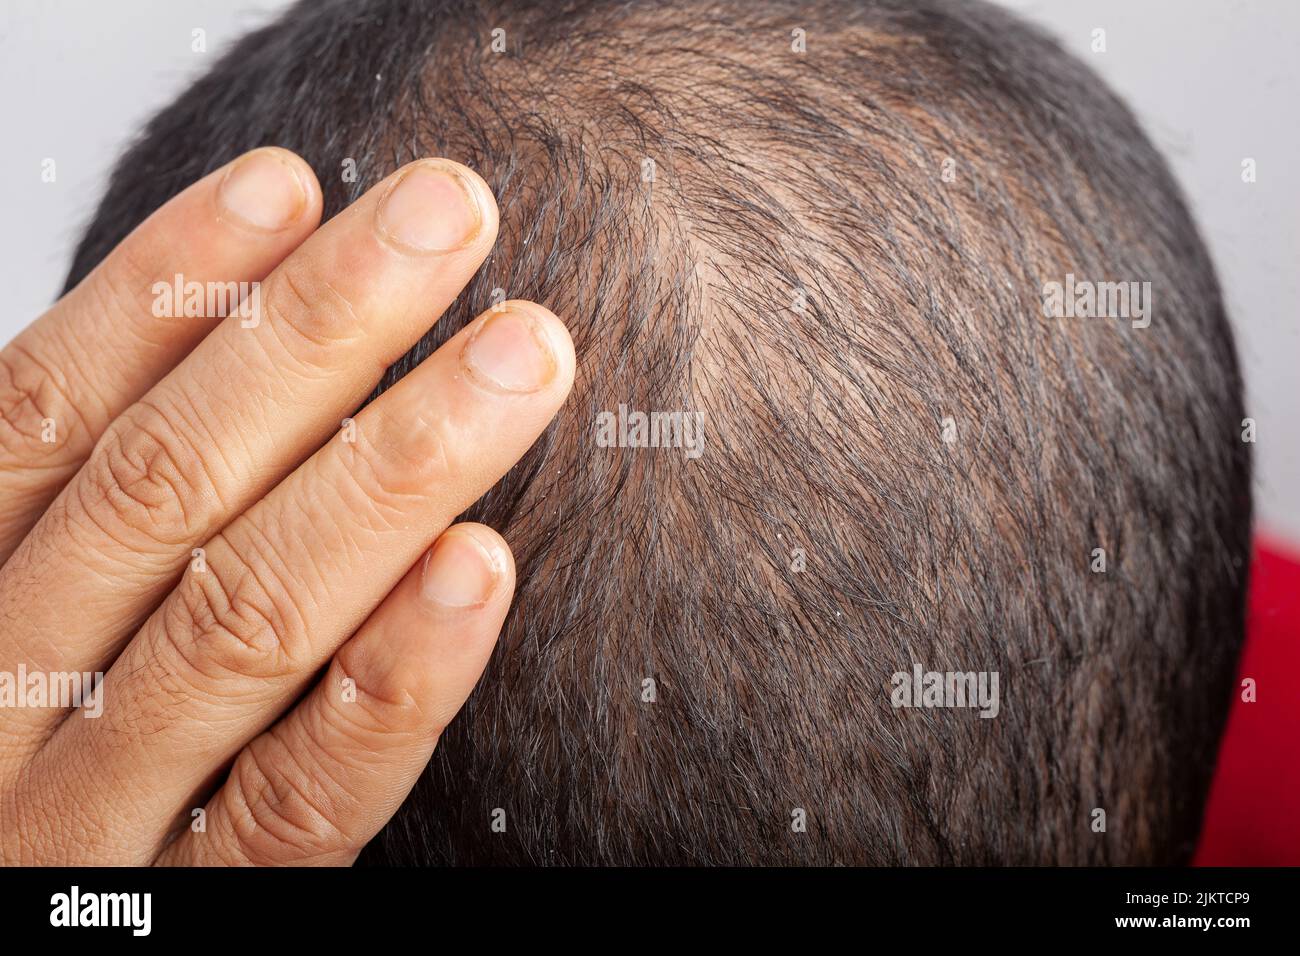 Male baldness, hair loss, dandruff on head, visible scalp. Man touching his  thinning hair or alopecia head Stock Photo - Alamy